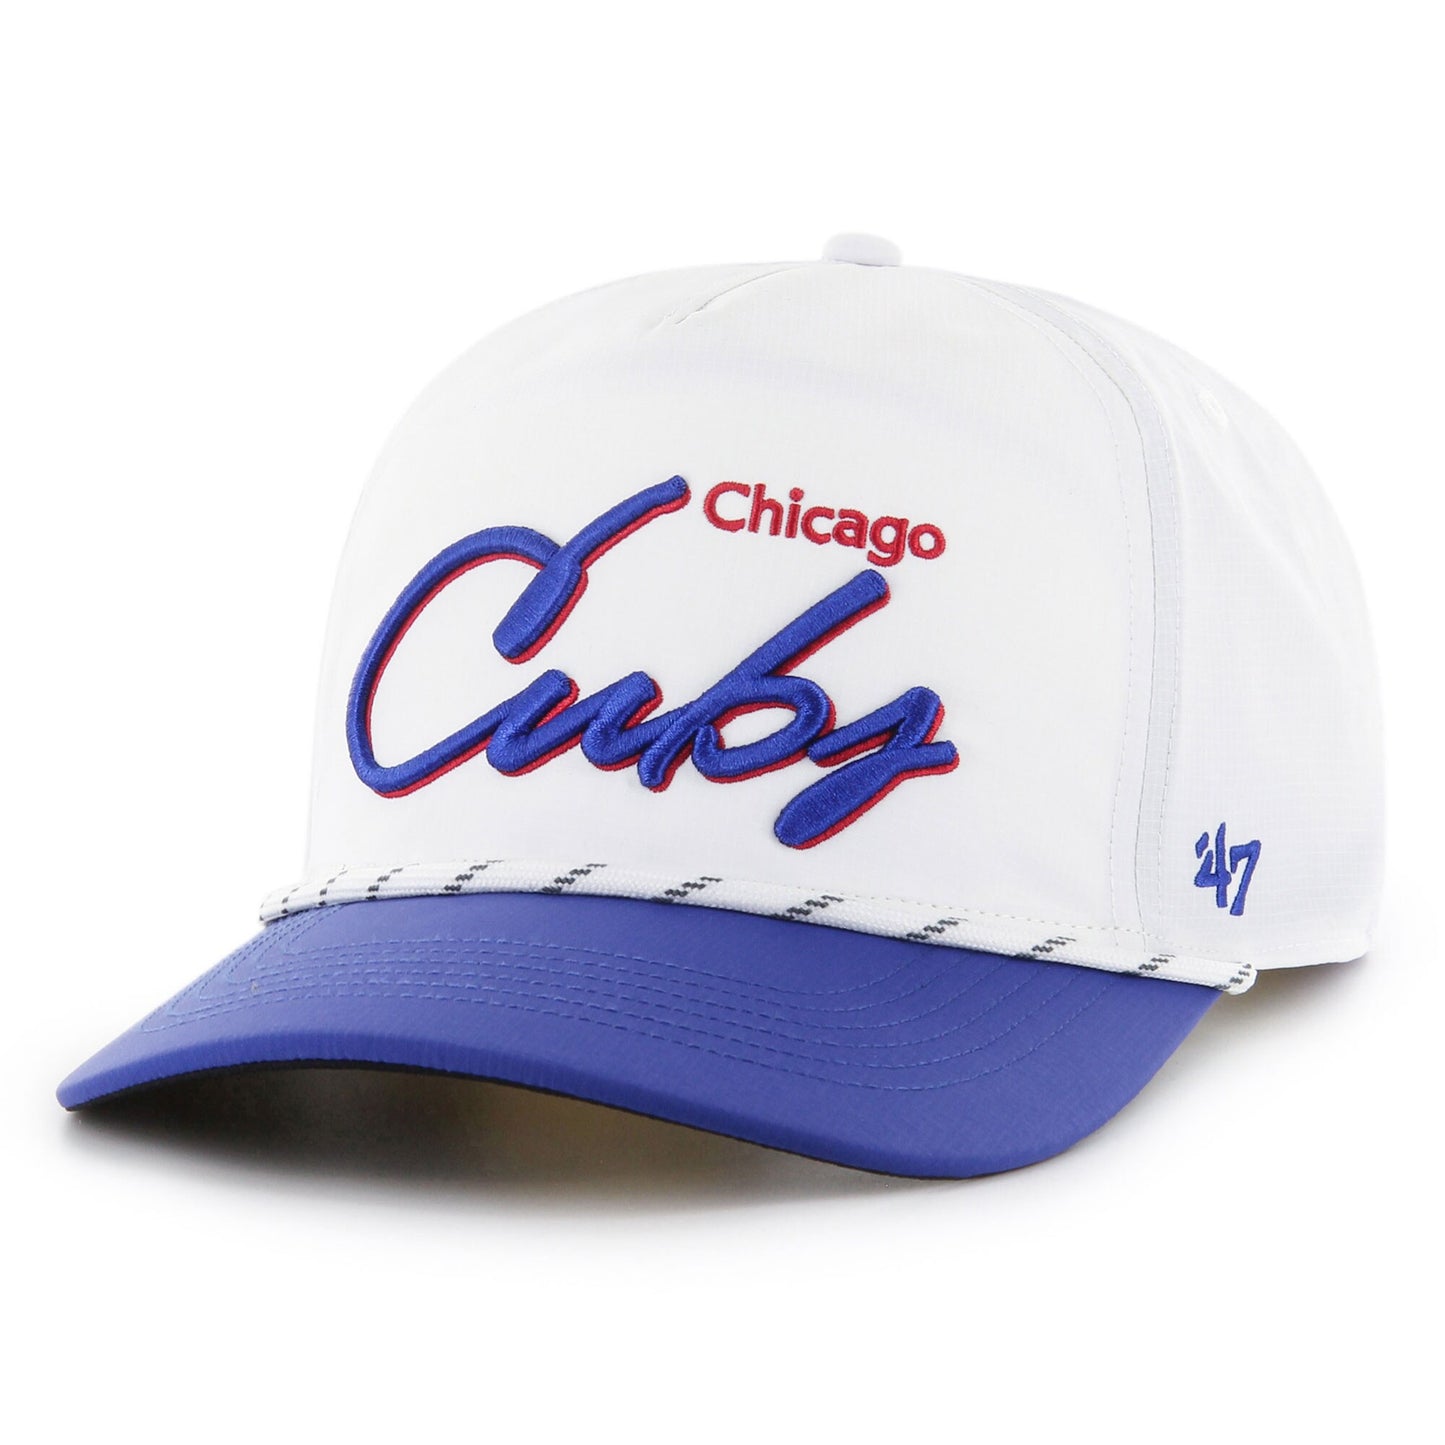 Chicago Cubs '47 Chamberlain Hitch Adjustable Hat - White